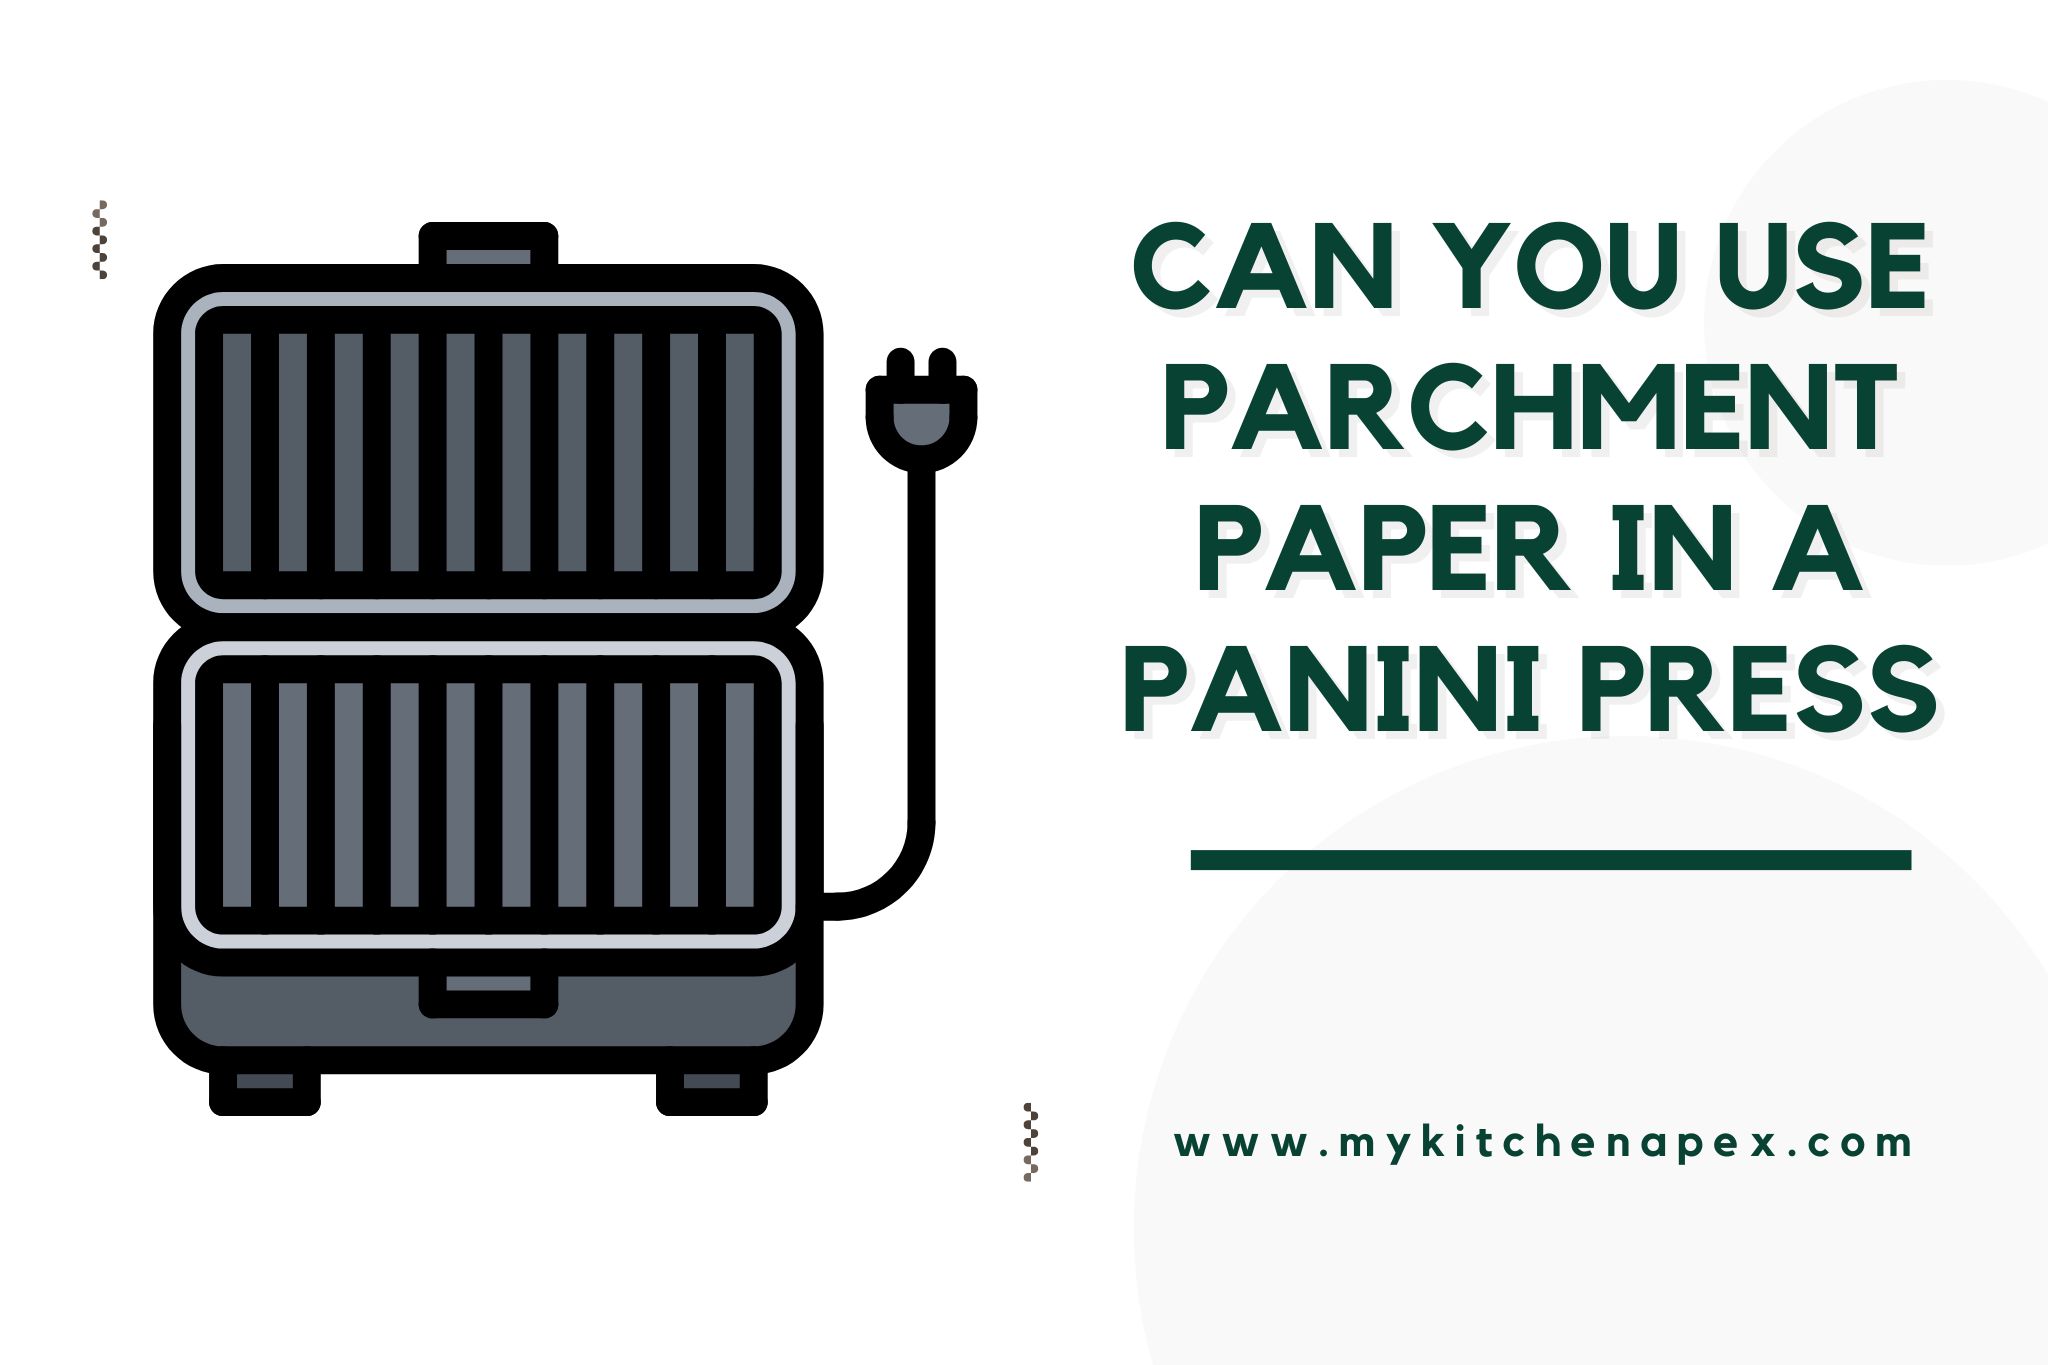 can you use parchment paper in a panini press